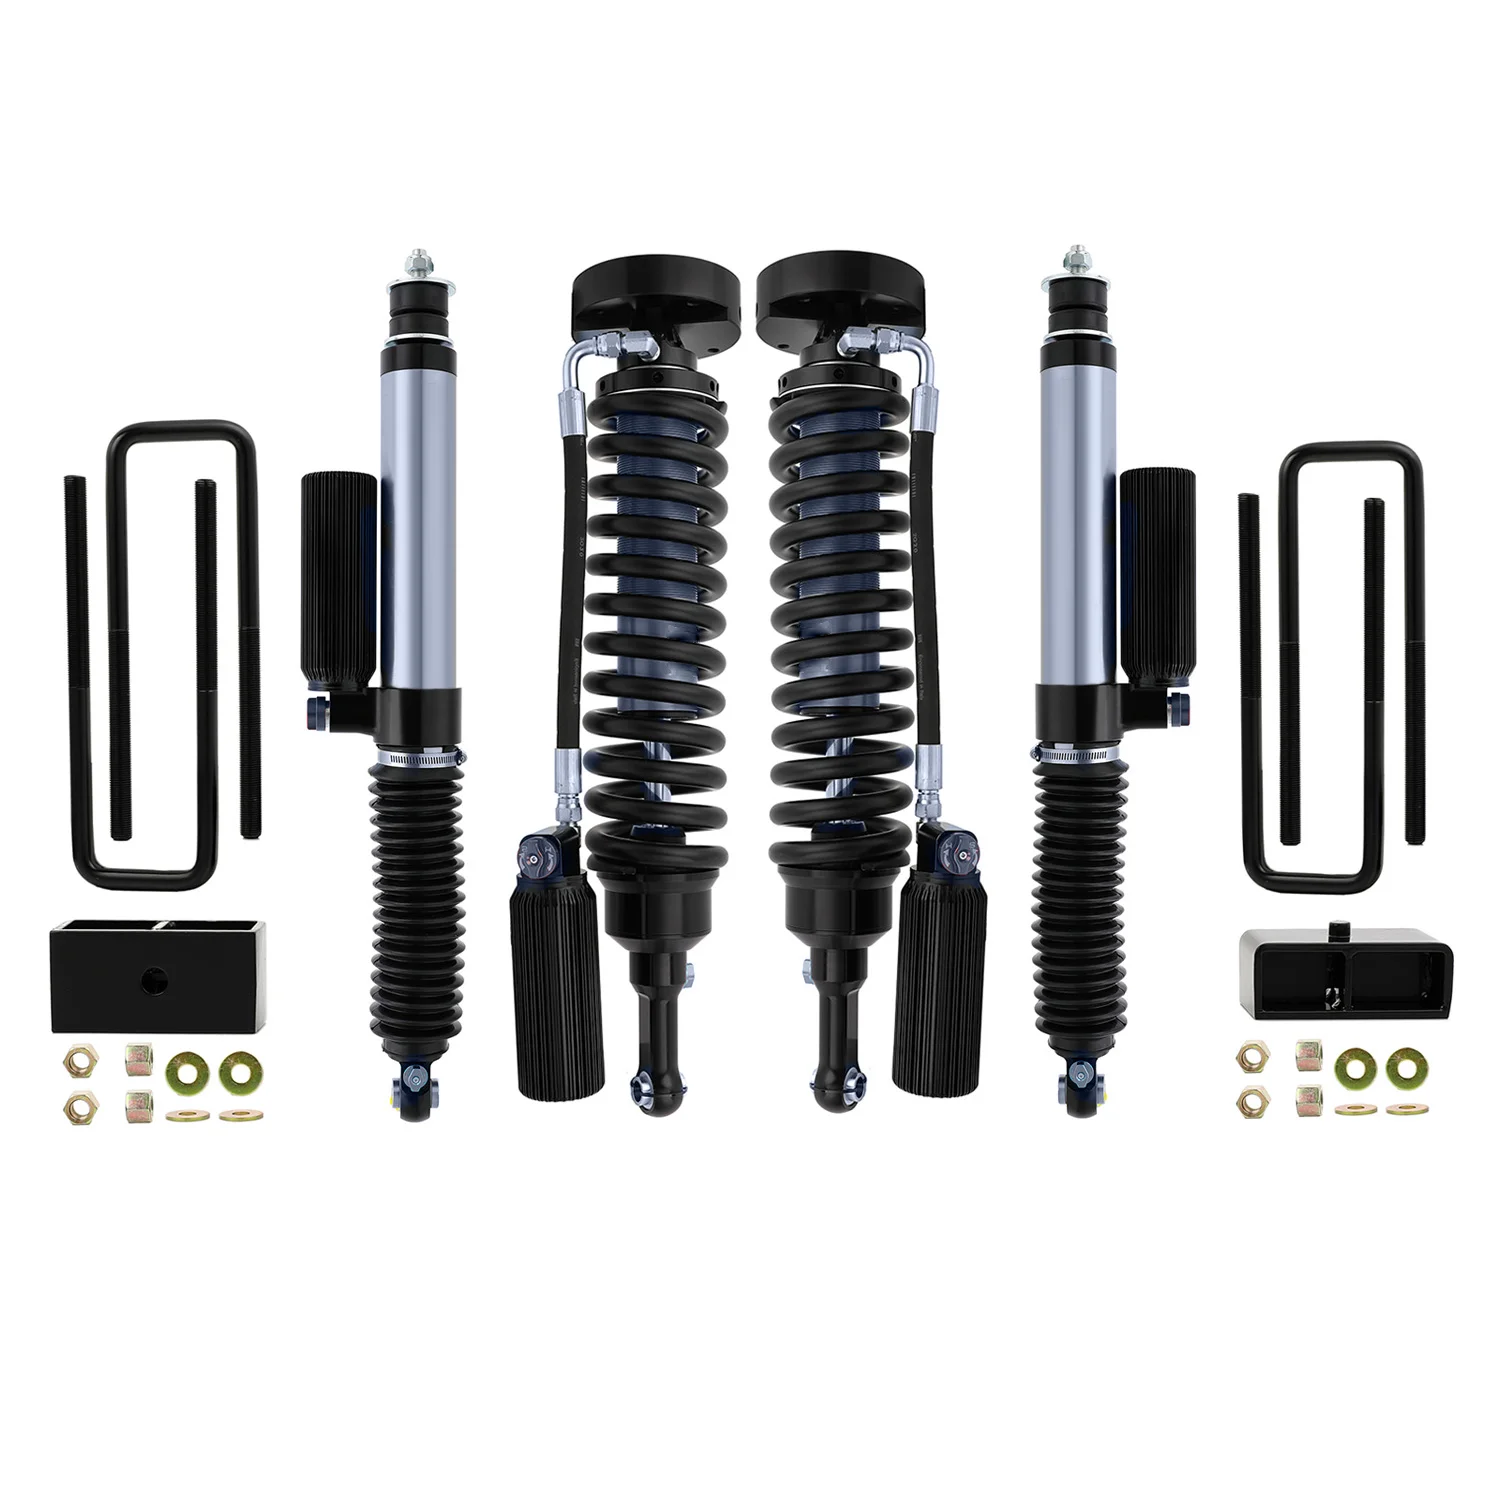 

4x4 offroad shock absorber coilover suspension 0-2"LIFT KIT for TOYOTA TUNDRA 2007-2021 LT765601